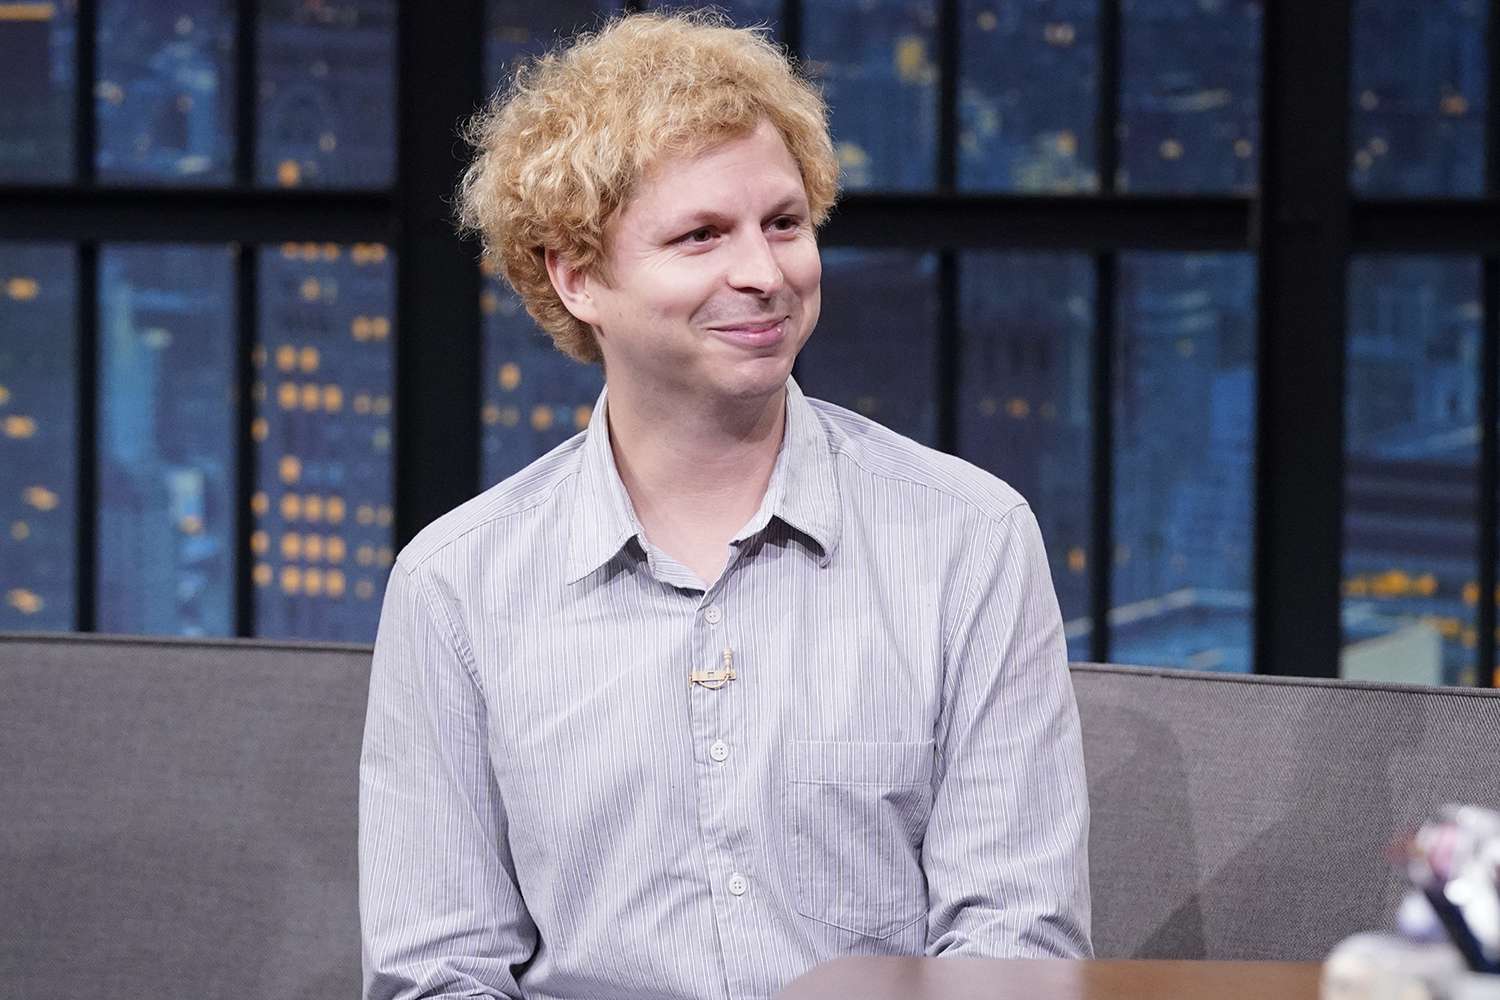 Michael Cera Jokes His Newly Blond Hair Is in a 'Weird Place Right Now': 'Just Feels Wrong'